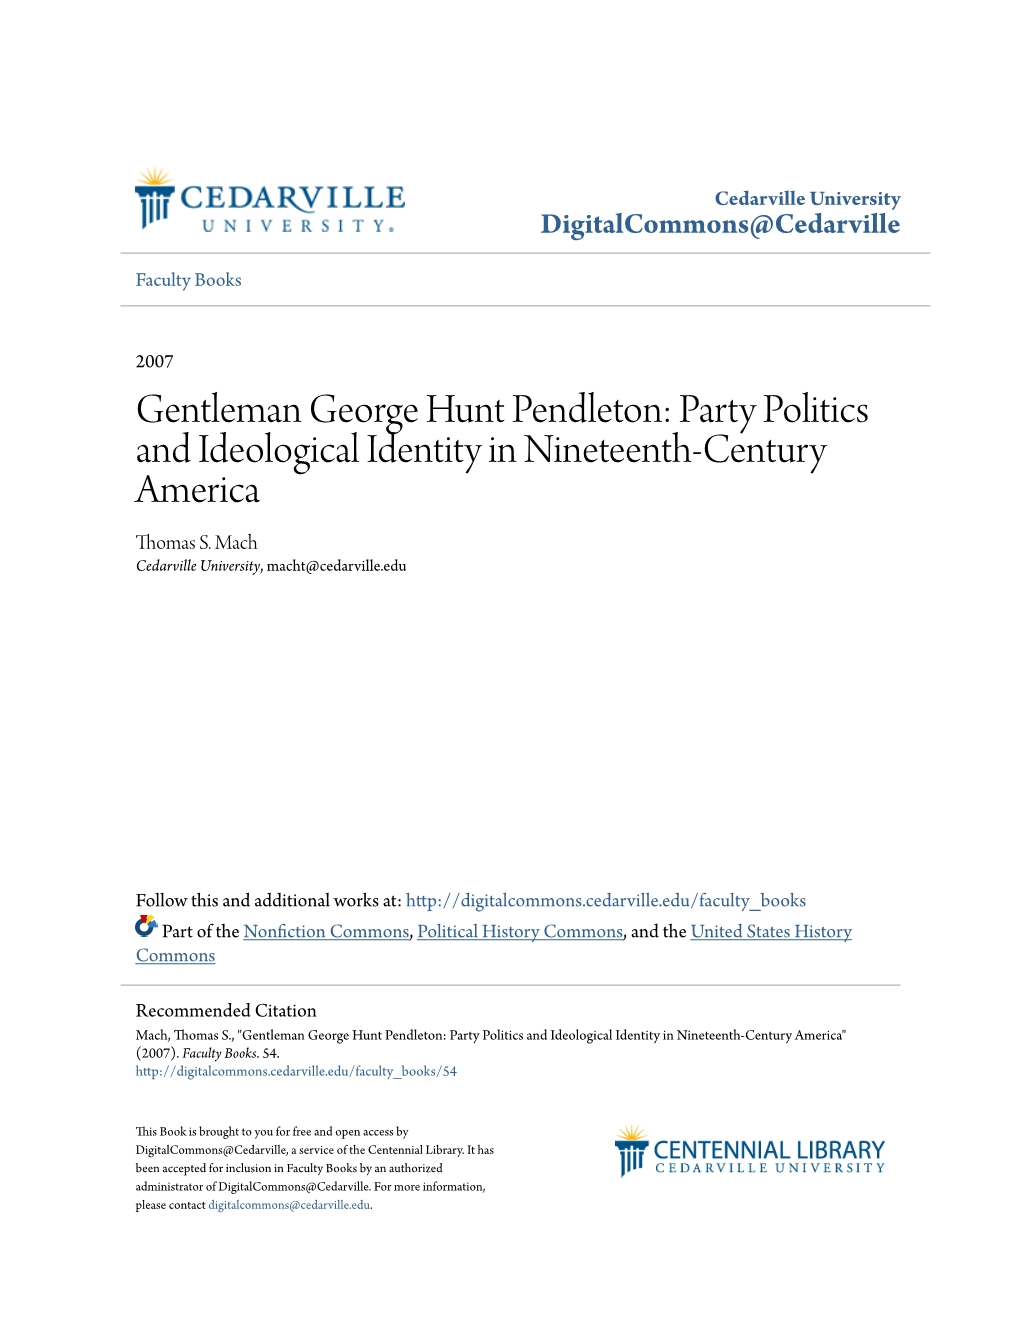 Gentleman George Hunt Pendleton: Party Politics and Ideological Identity in Nineteenth-Century America Thomas S